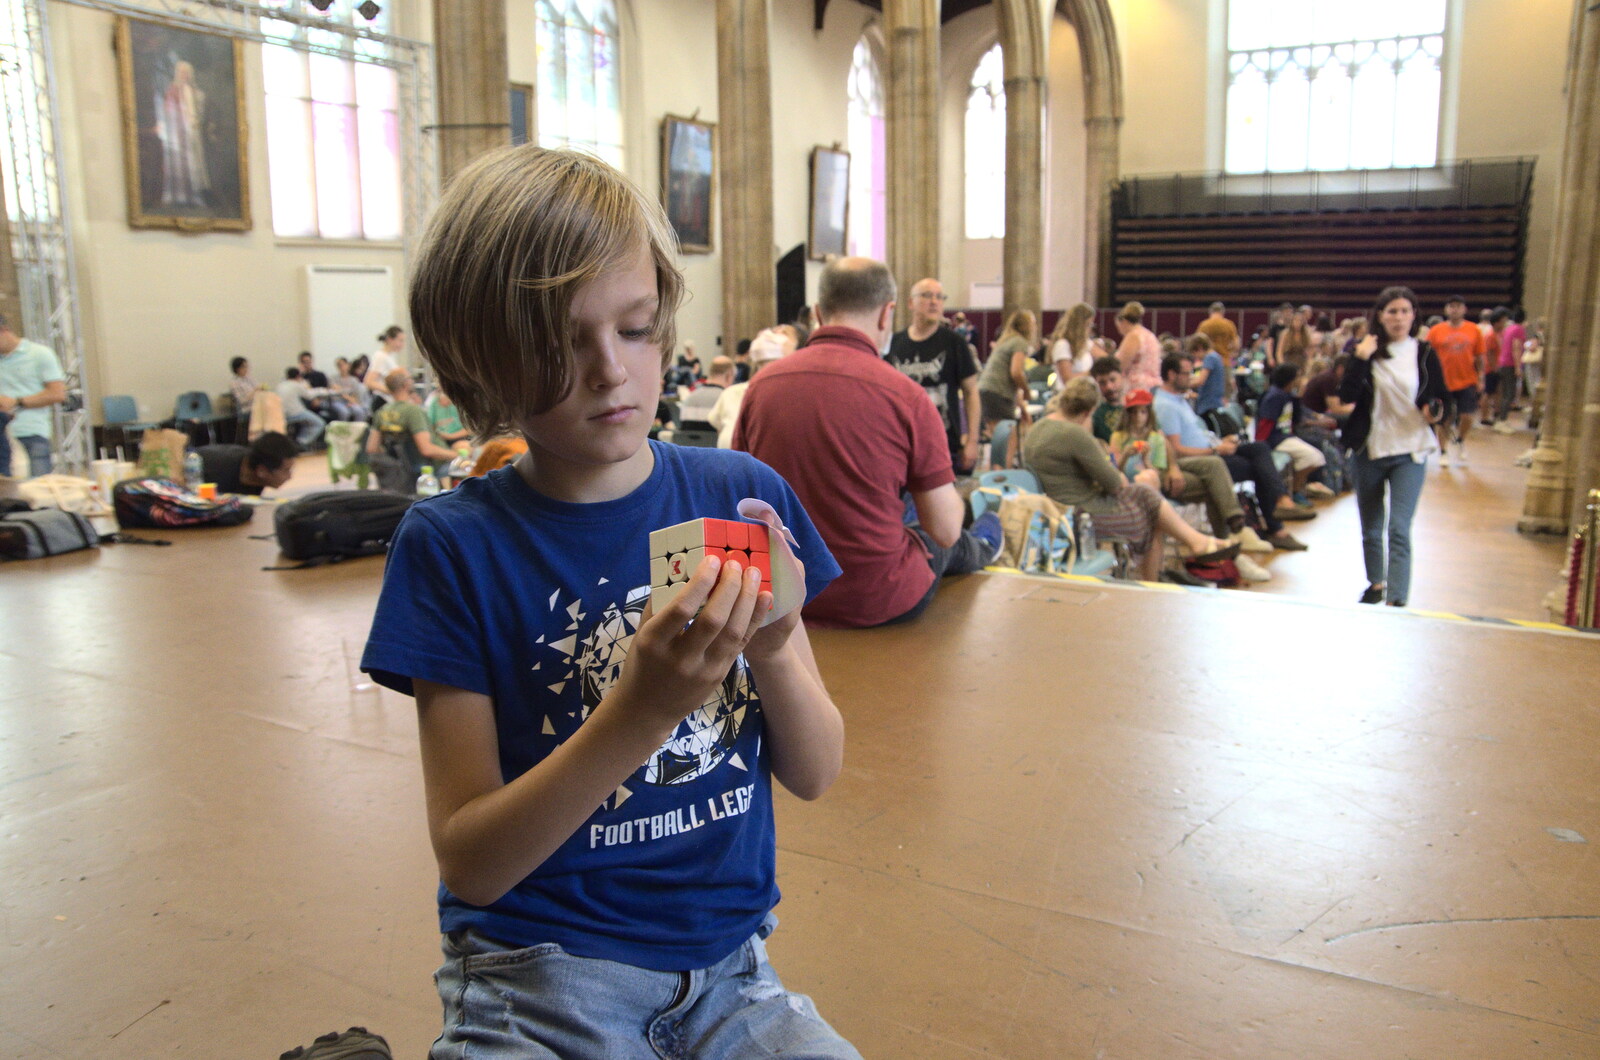 The World Cube Association Rubik's Competition, St. Andrew's Hall, Norwich - 31st July 2022: Harry's doing a 3x3 on the stage